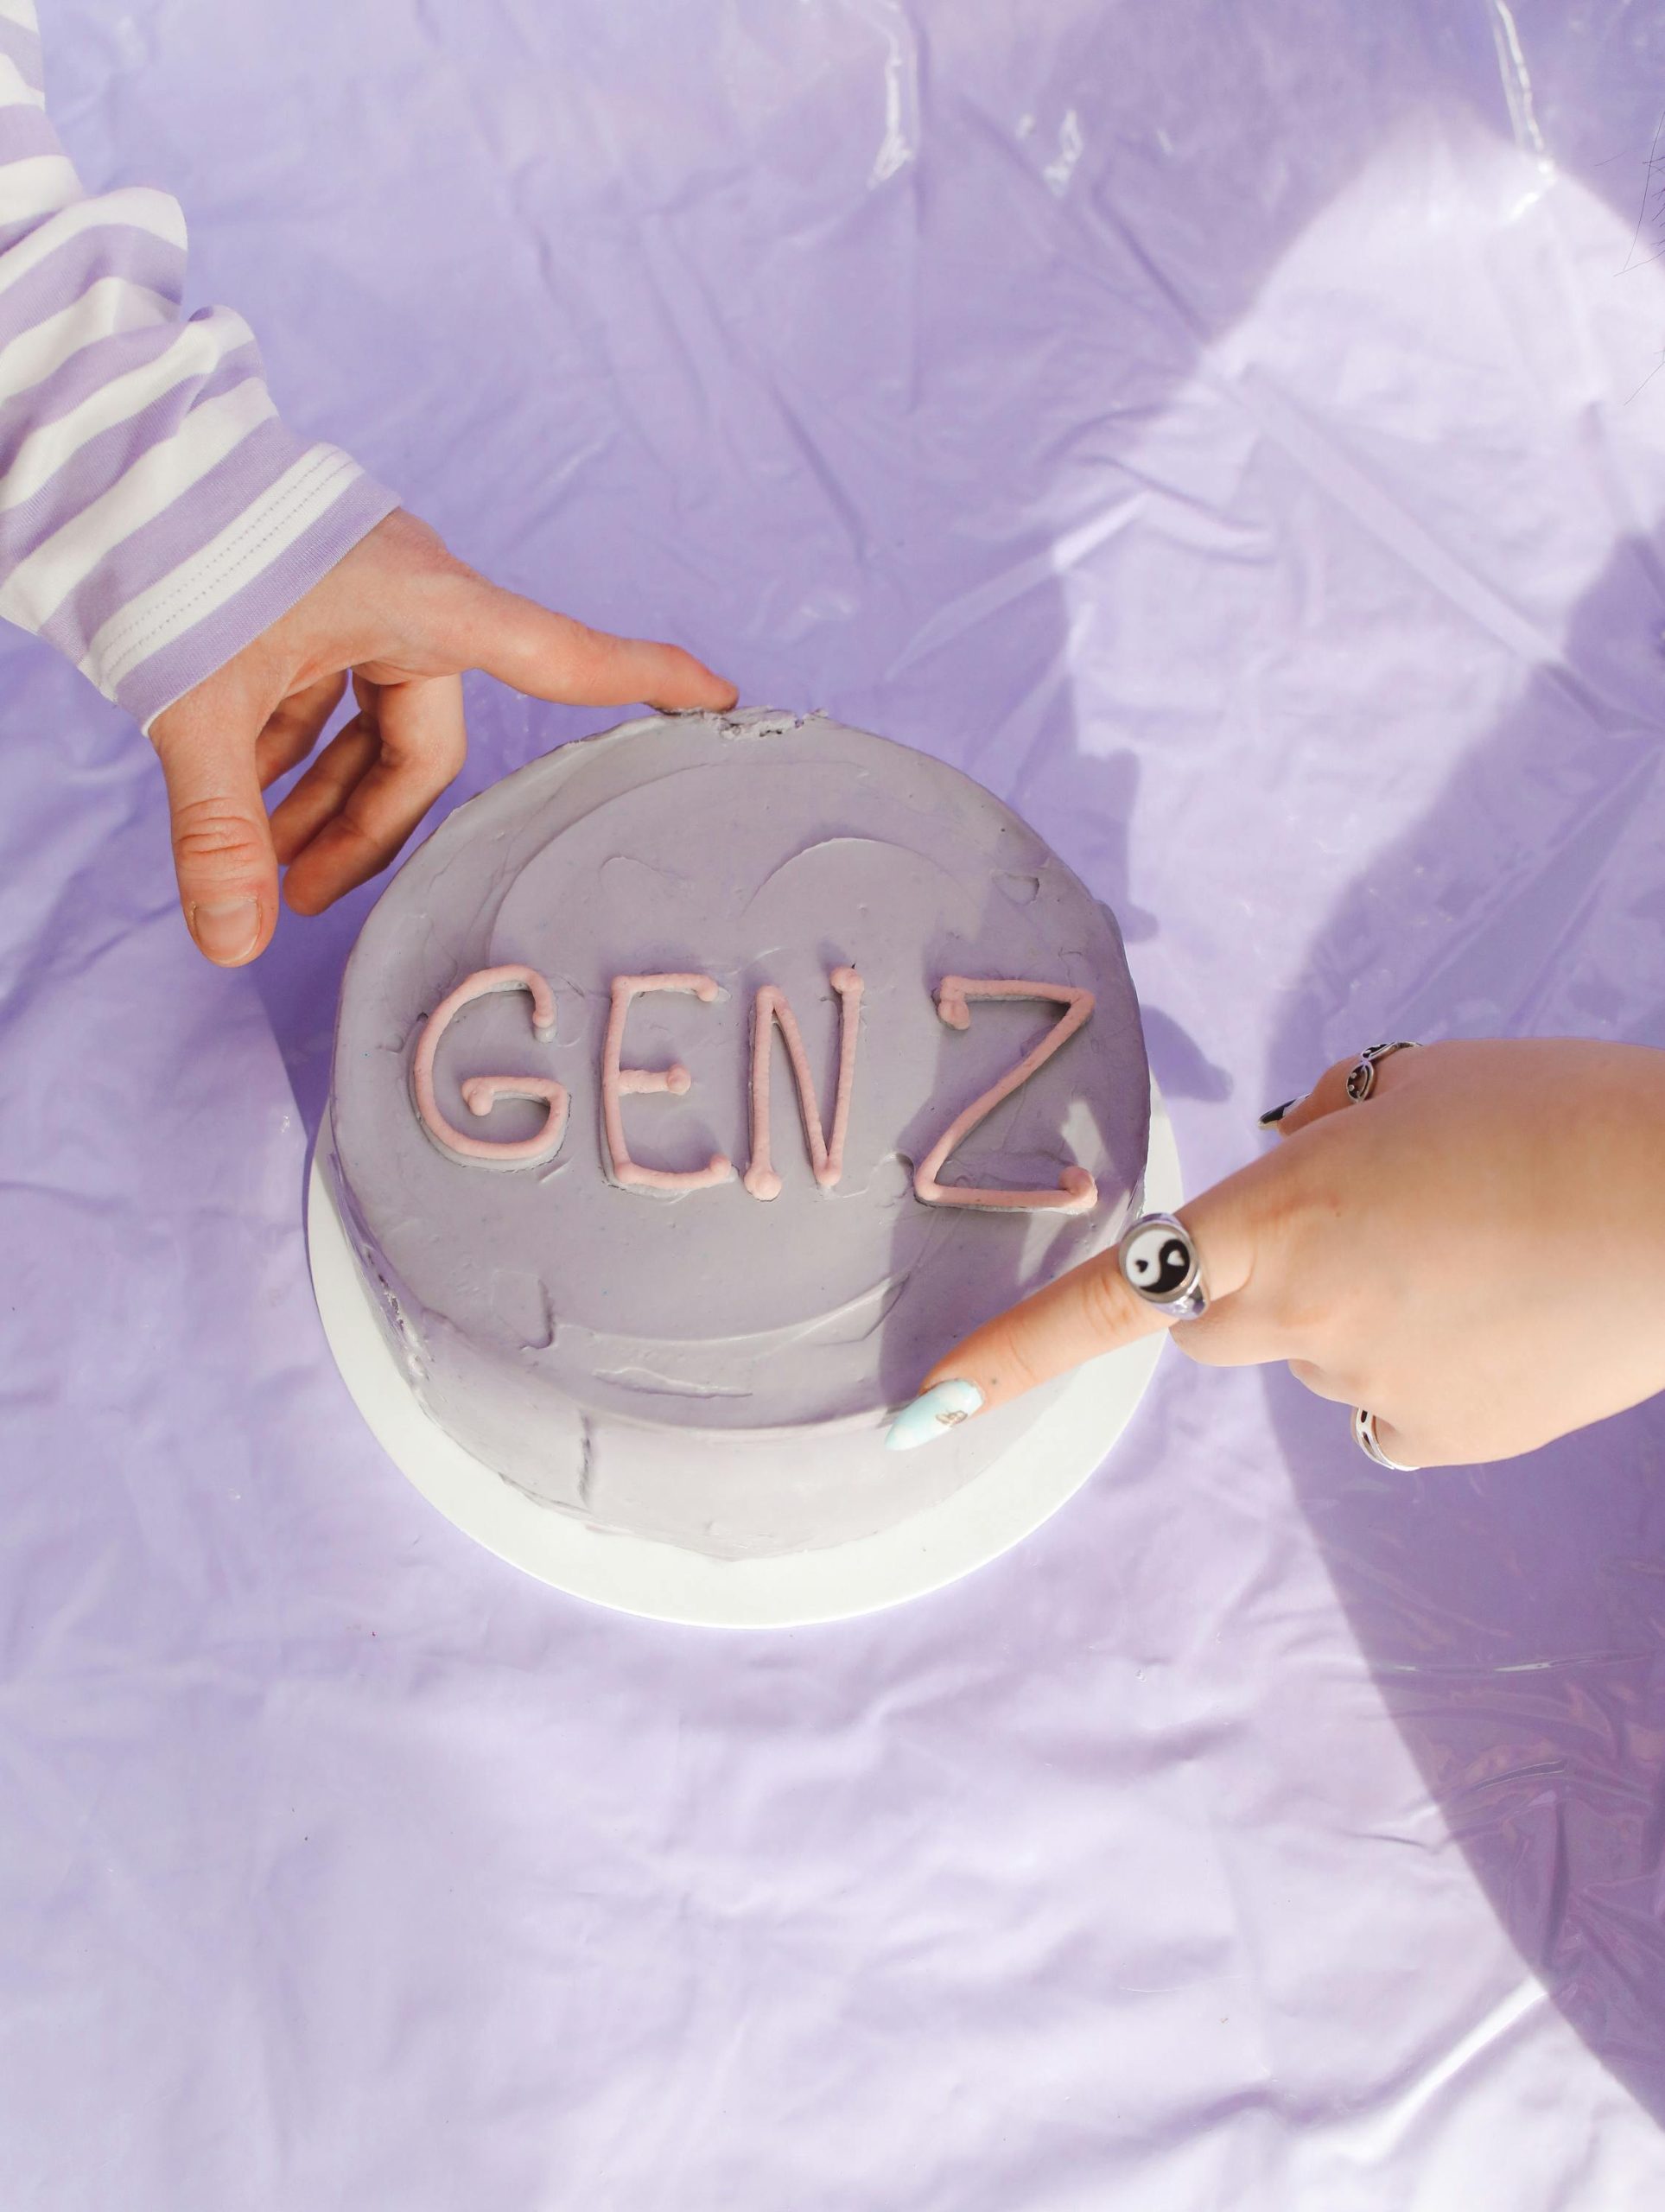 How Can Brands Build Trust With Gen Z Consumers?